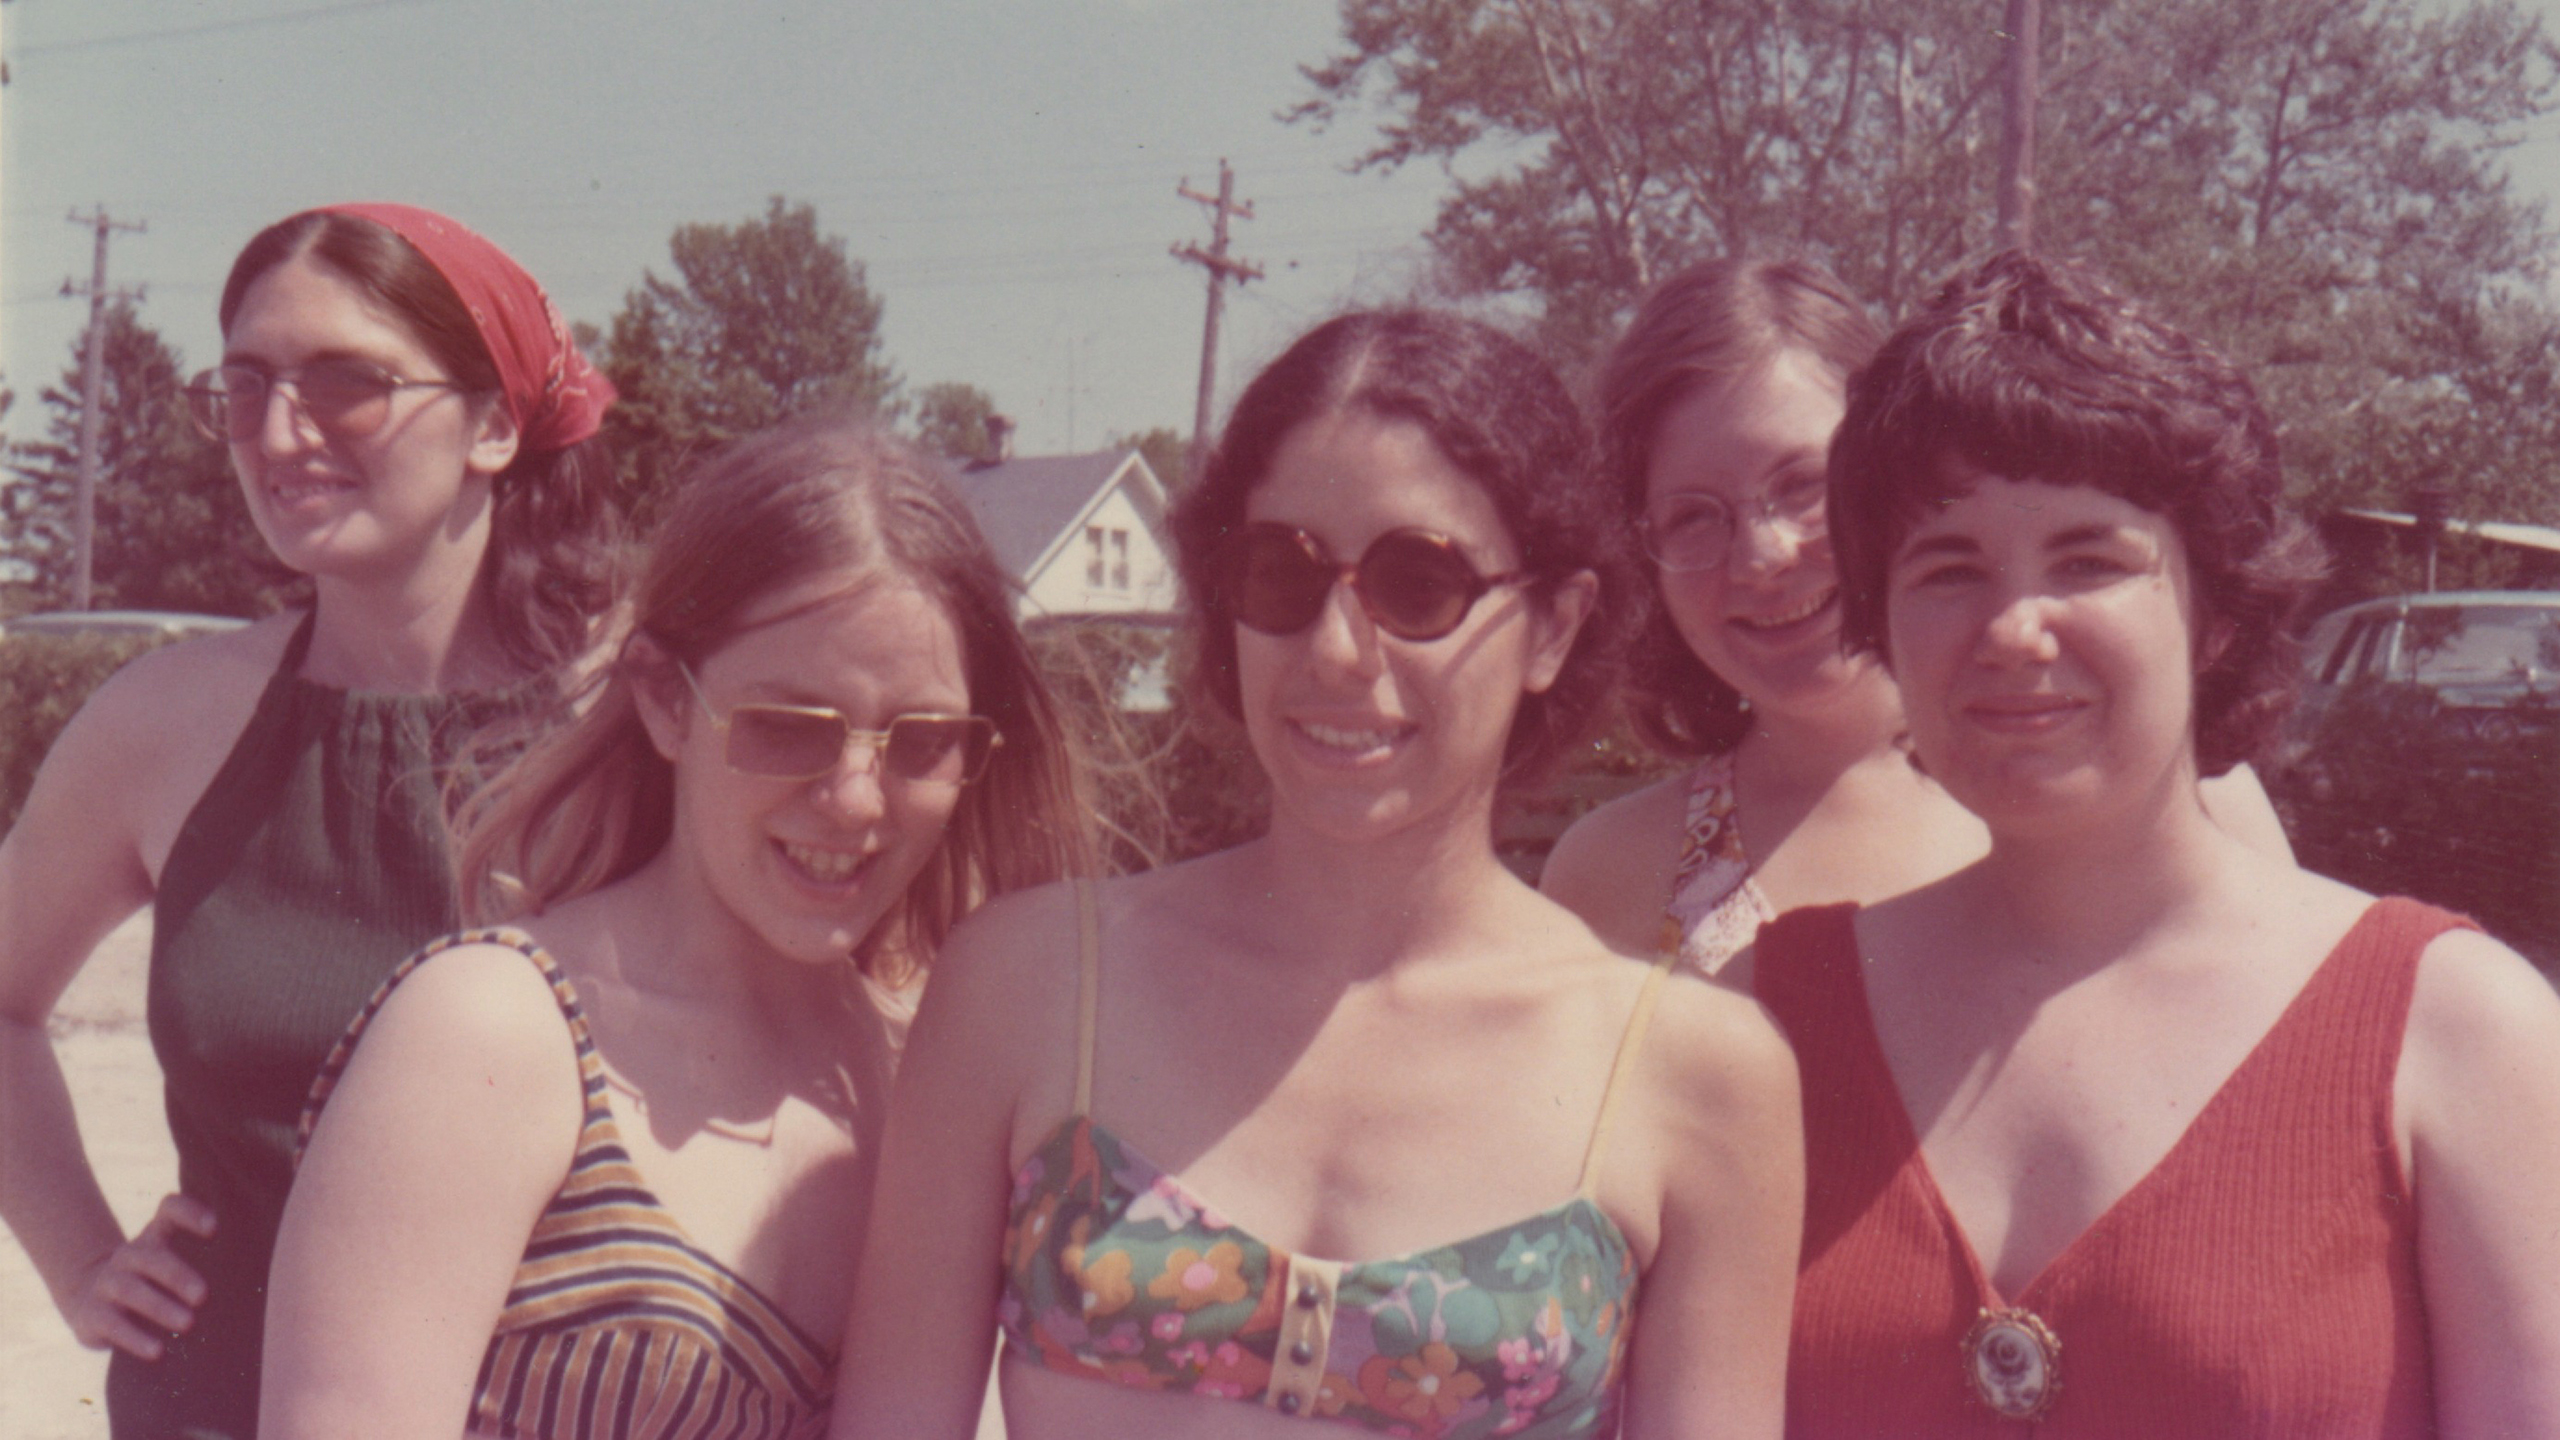 A vintage shot of a group of women in the sixties in tank tops smiling